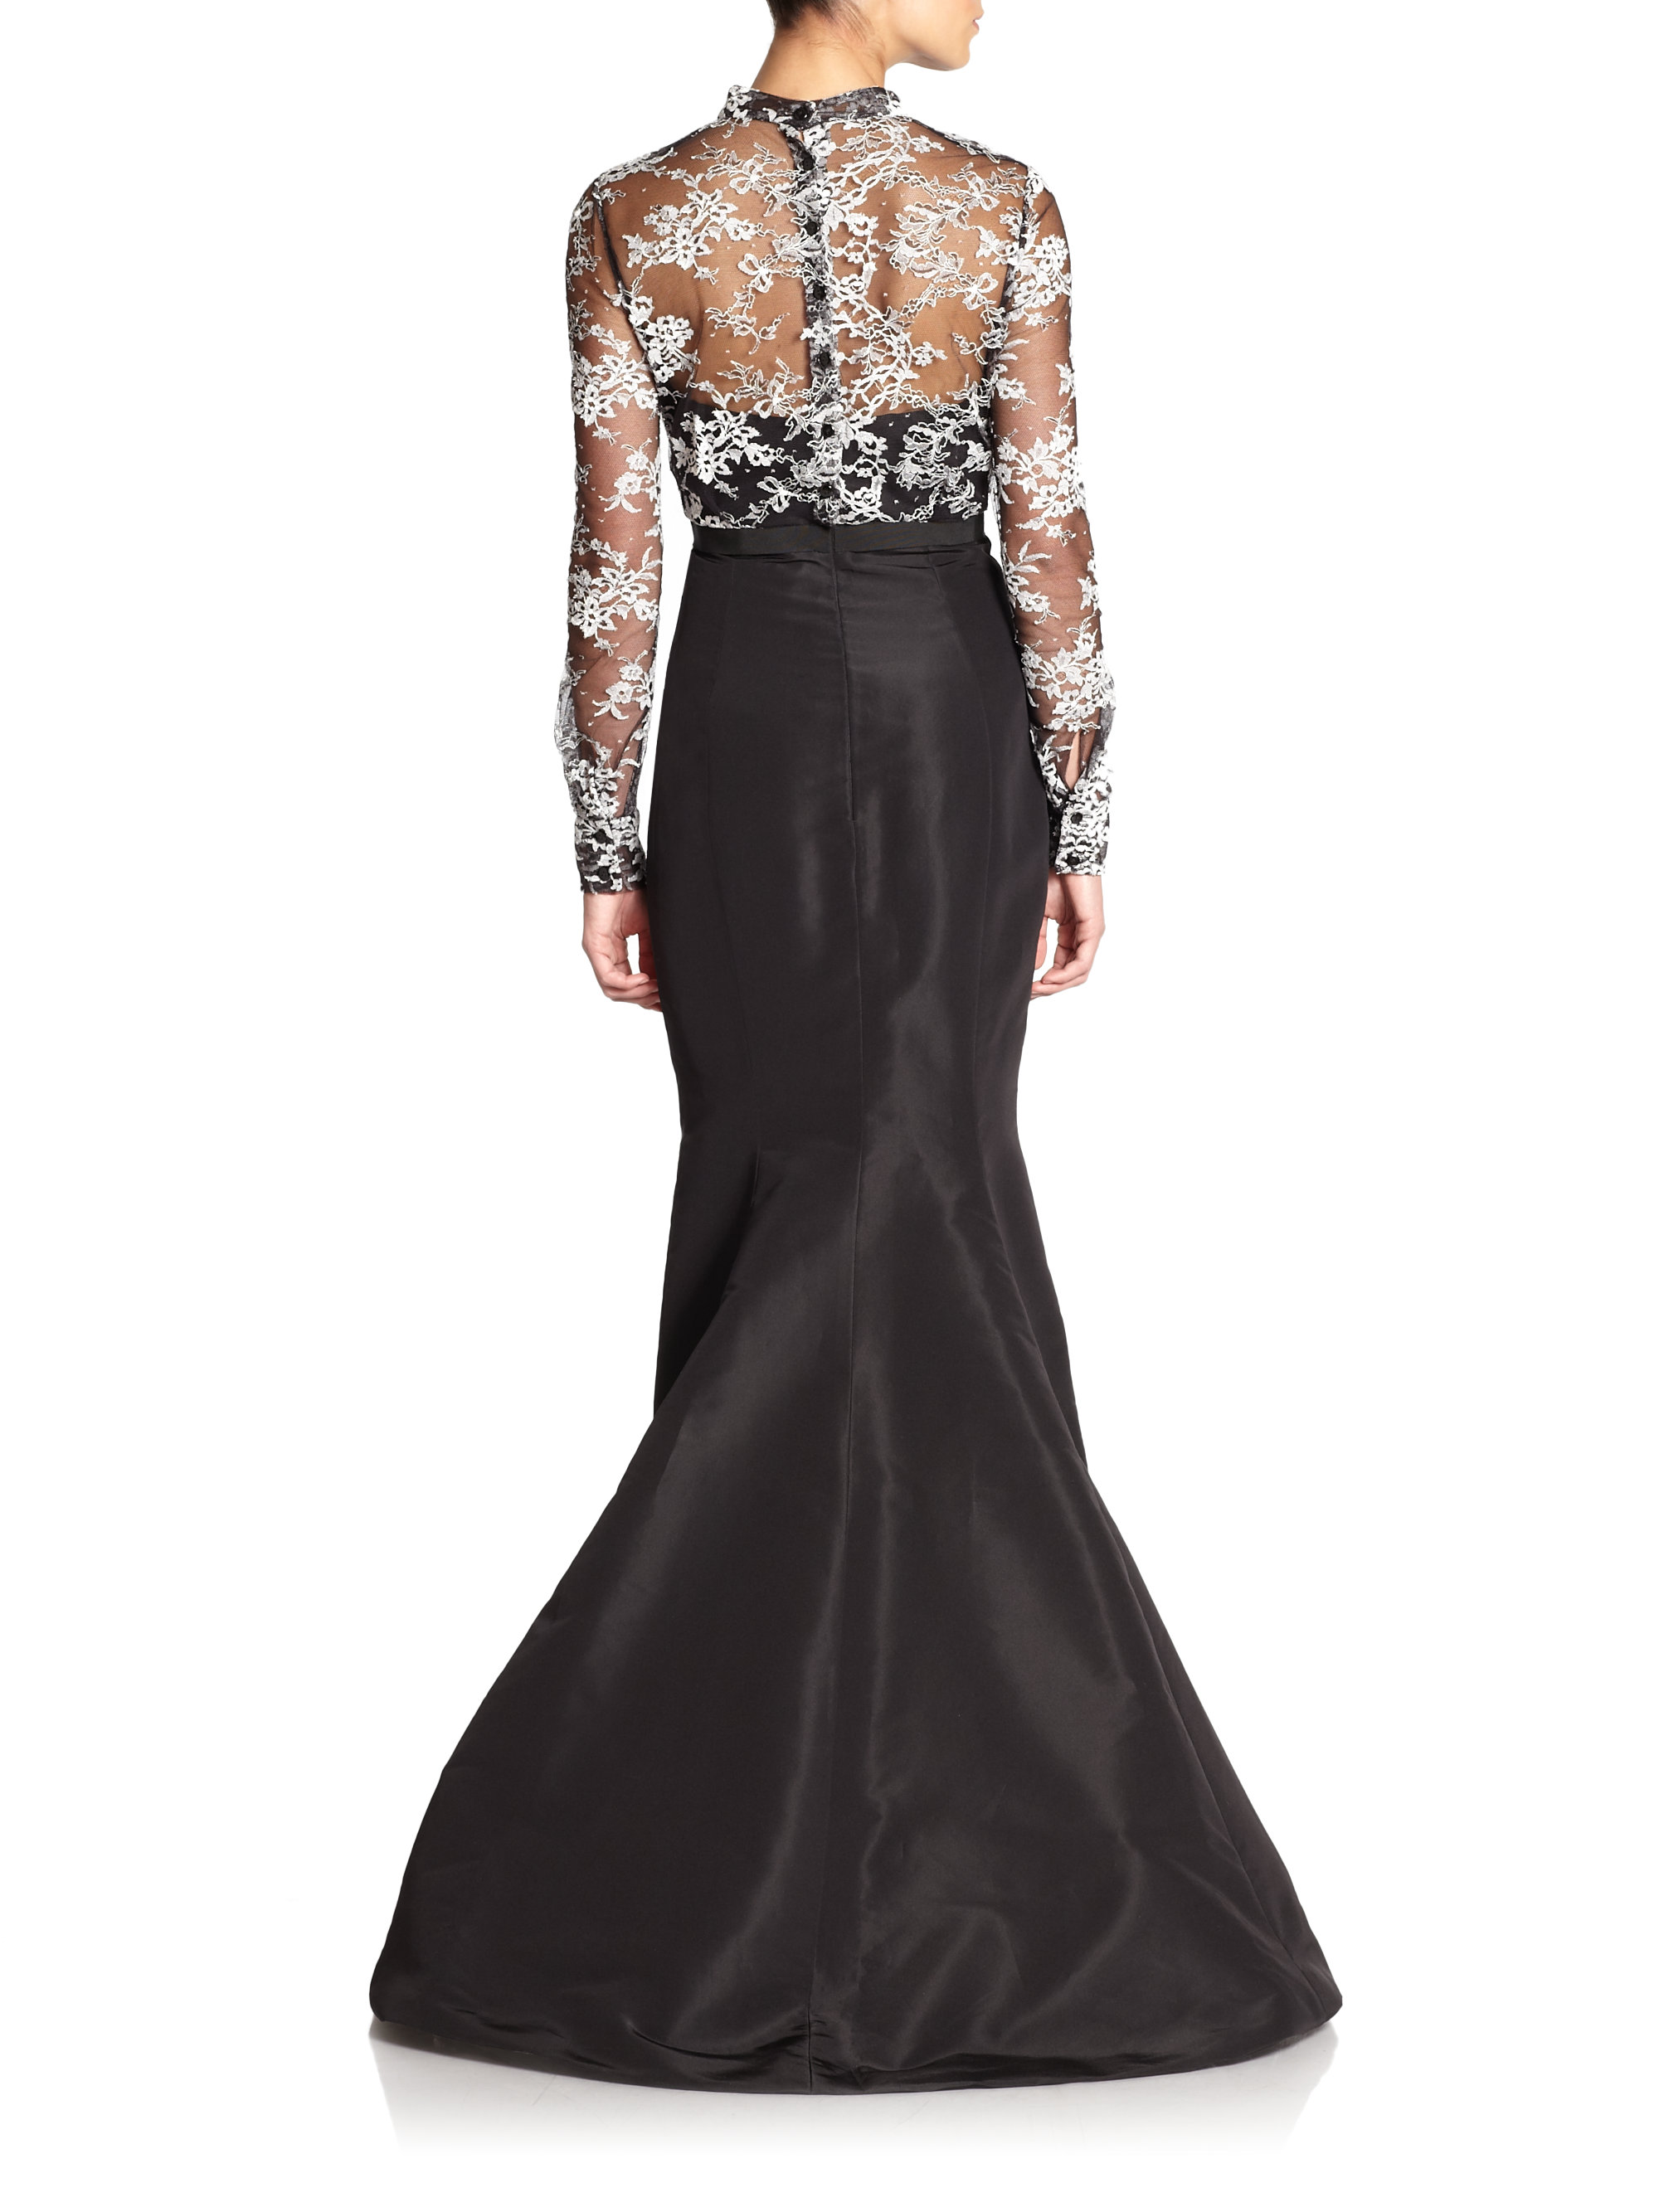 Lyst - Carolina Herrera Laceoverlay Evening Gown in Black